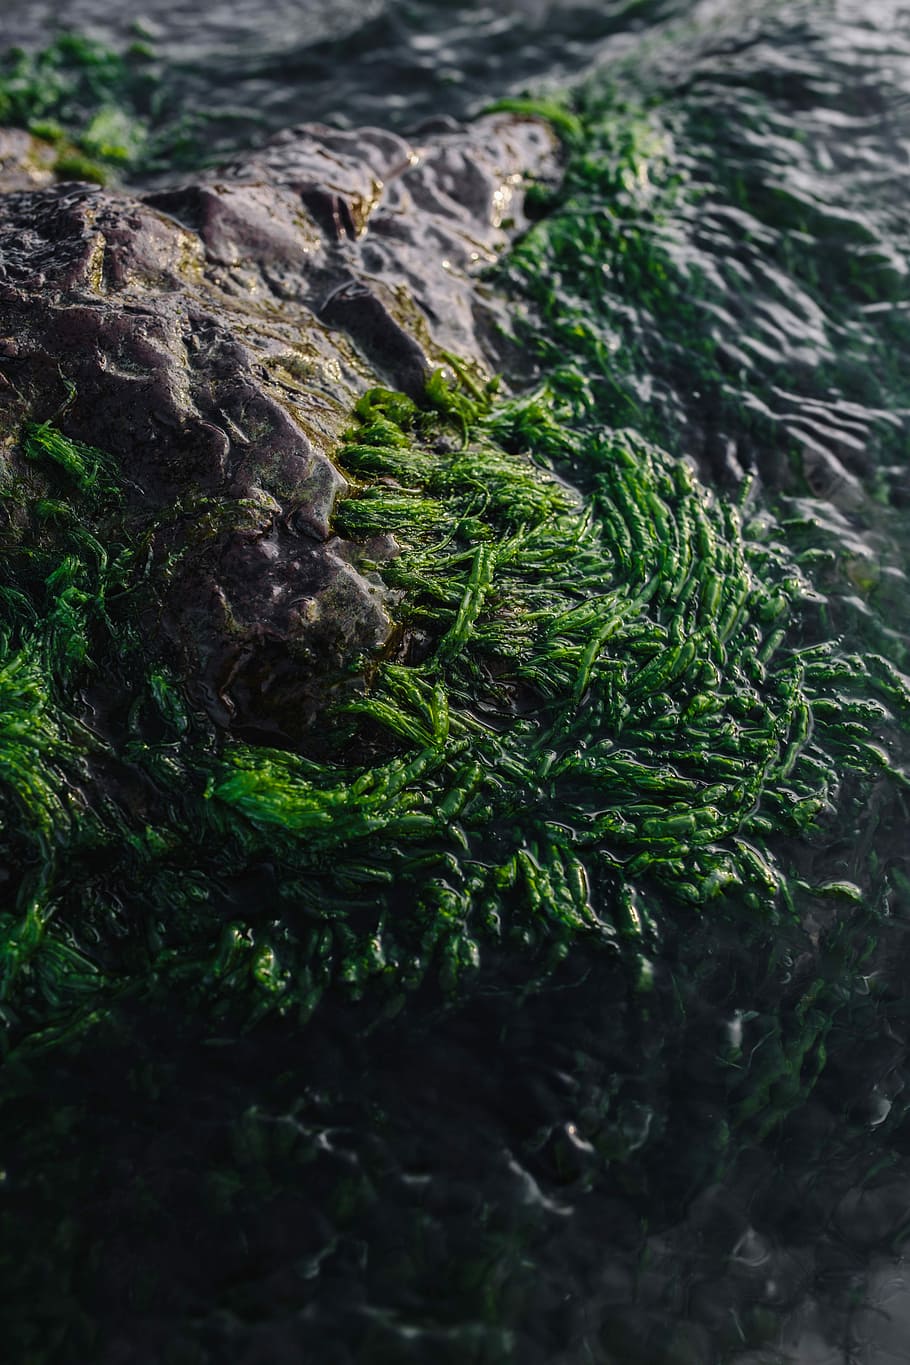 Seaweed covering a rocky beach, ocean, shore, green, nature, rockweed